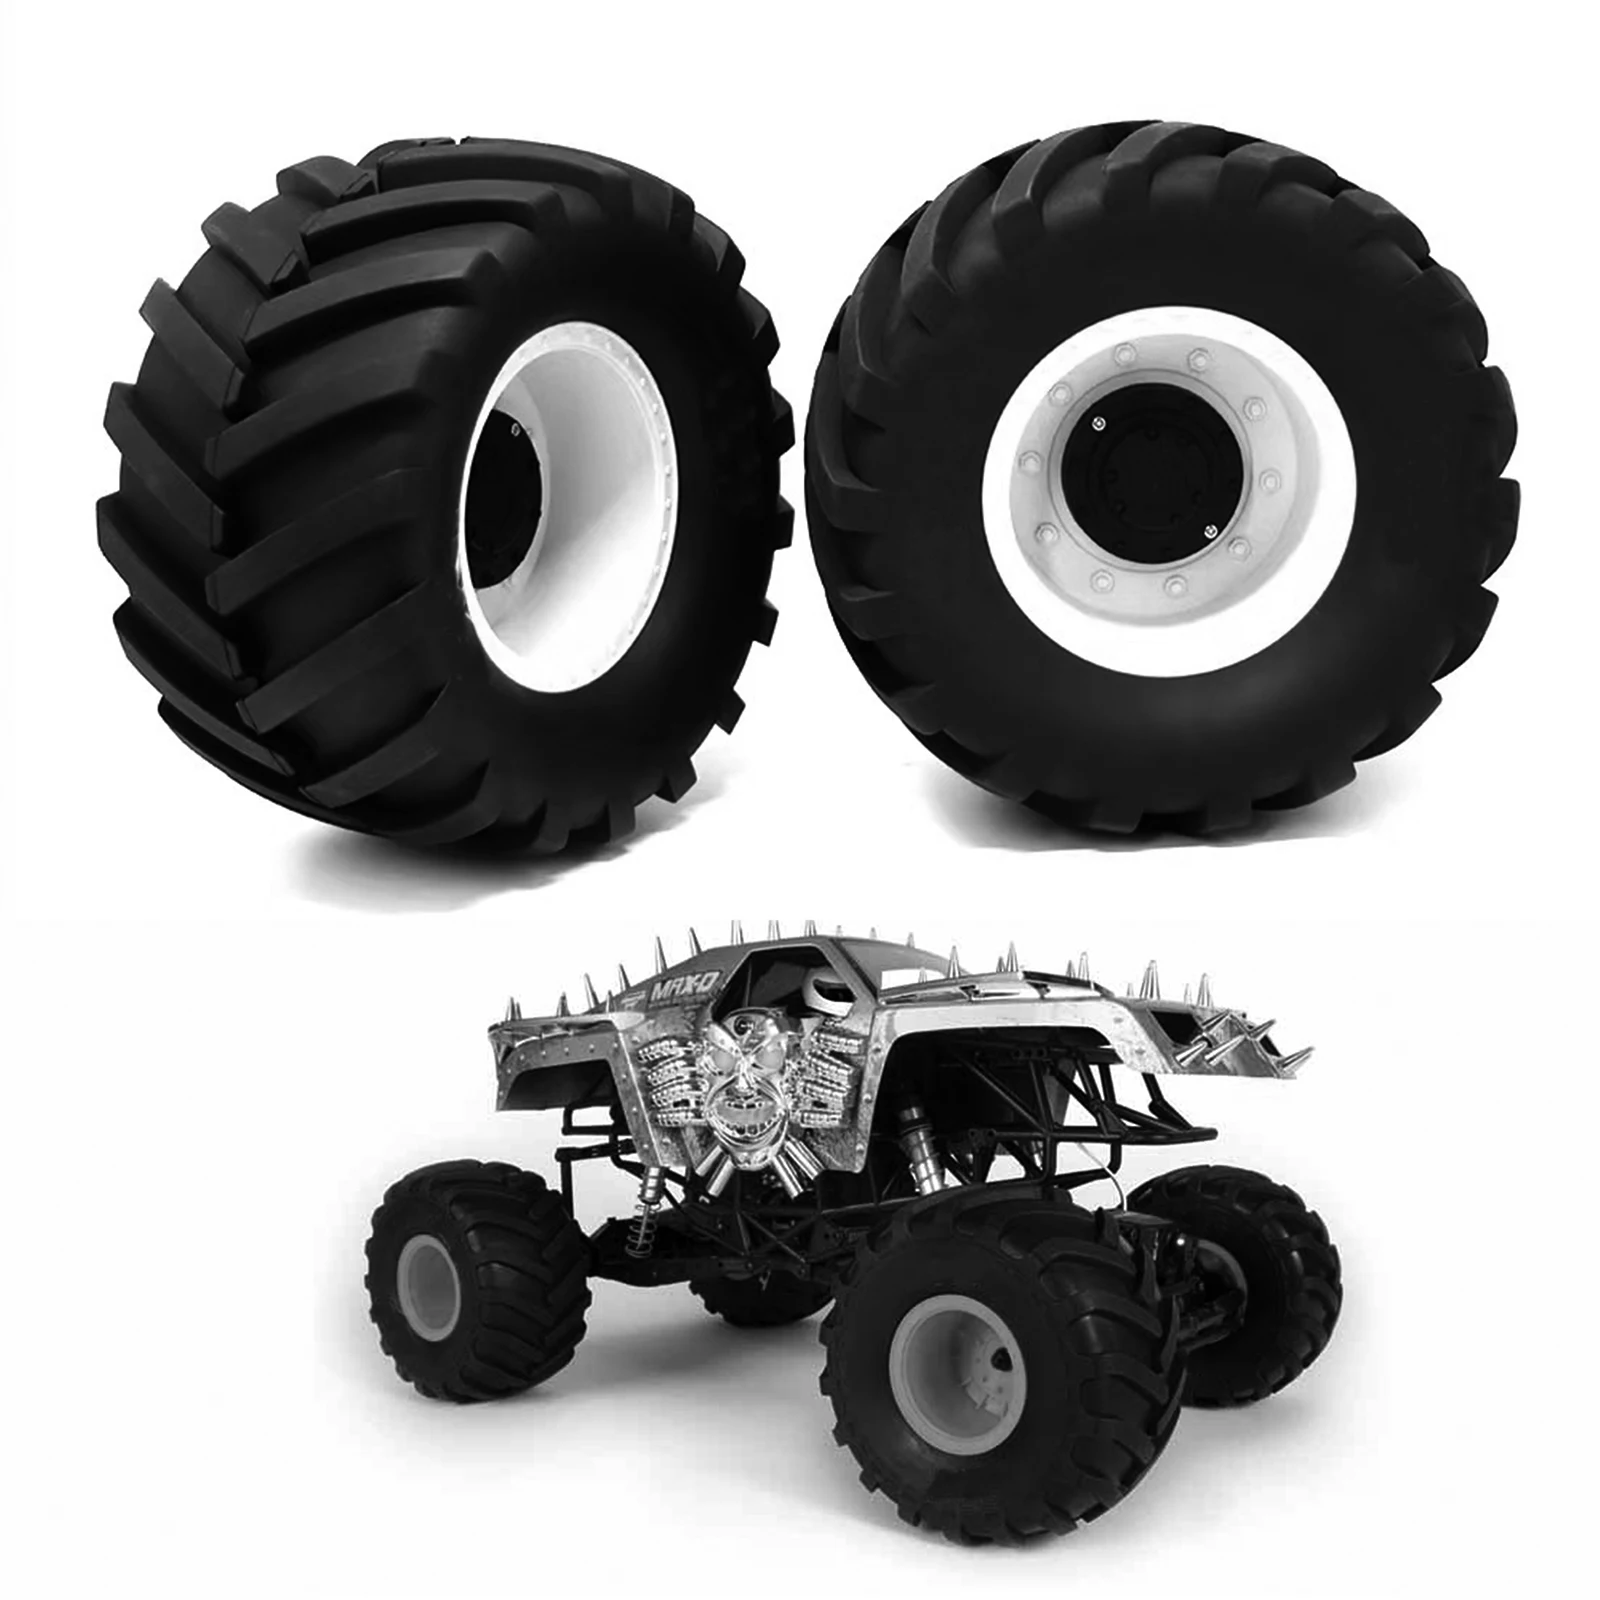 

RS 2PCS 1/8 Scale RC Monster Truck Rubber Tire w/17mm Hex Plastic Wheel Rim 173mm/91mm Rubber Rocks Tyres Set Fit for Traxxas